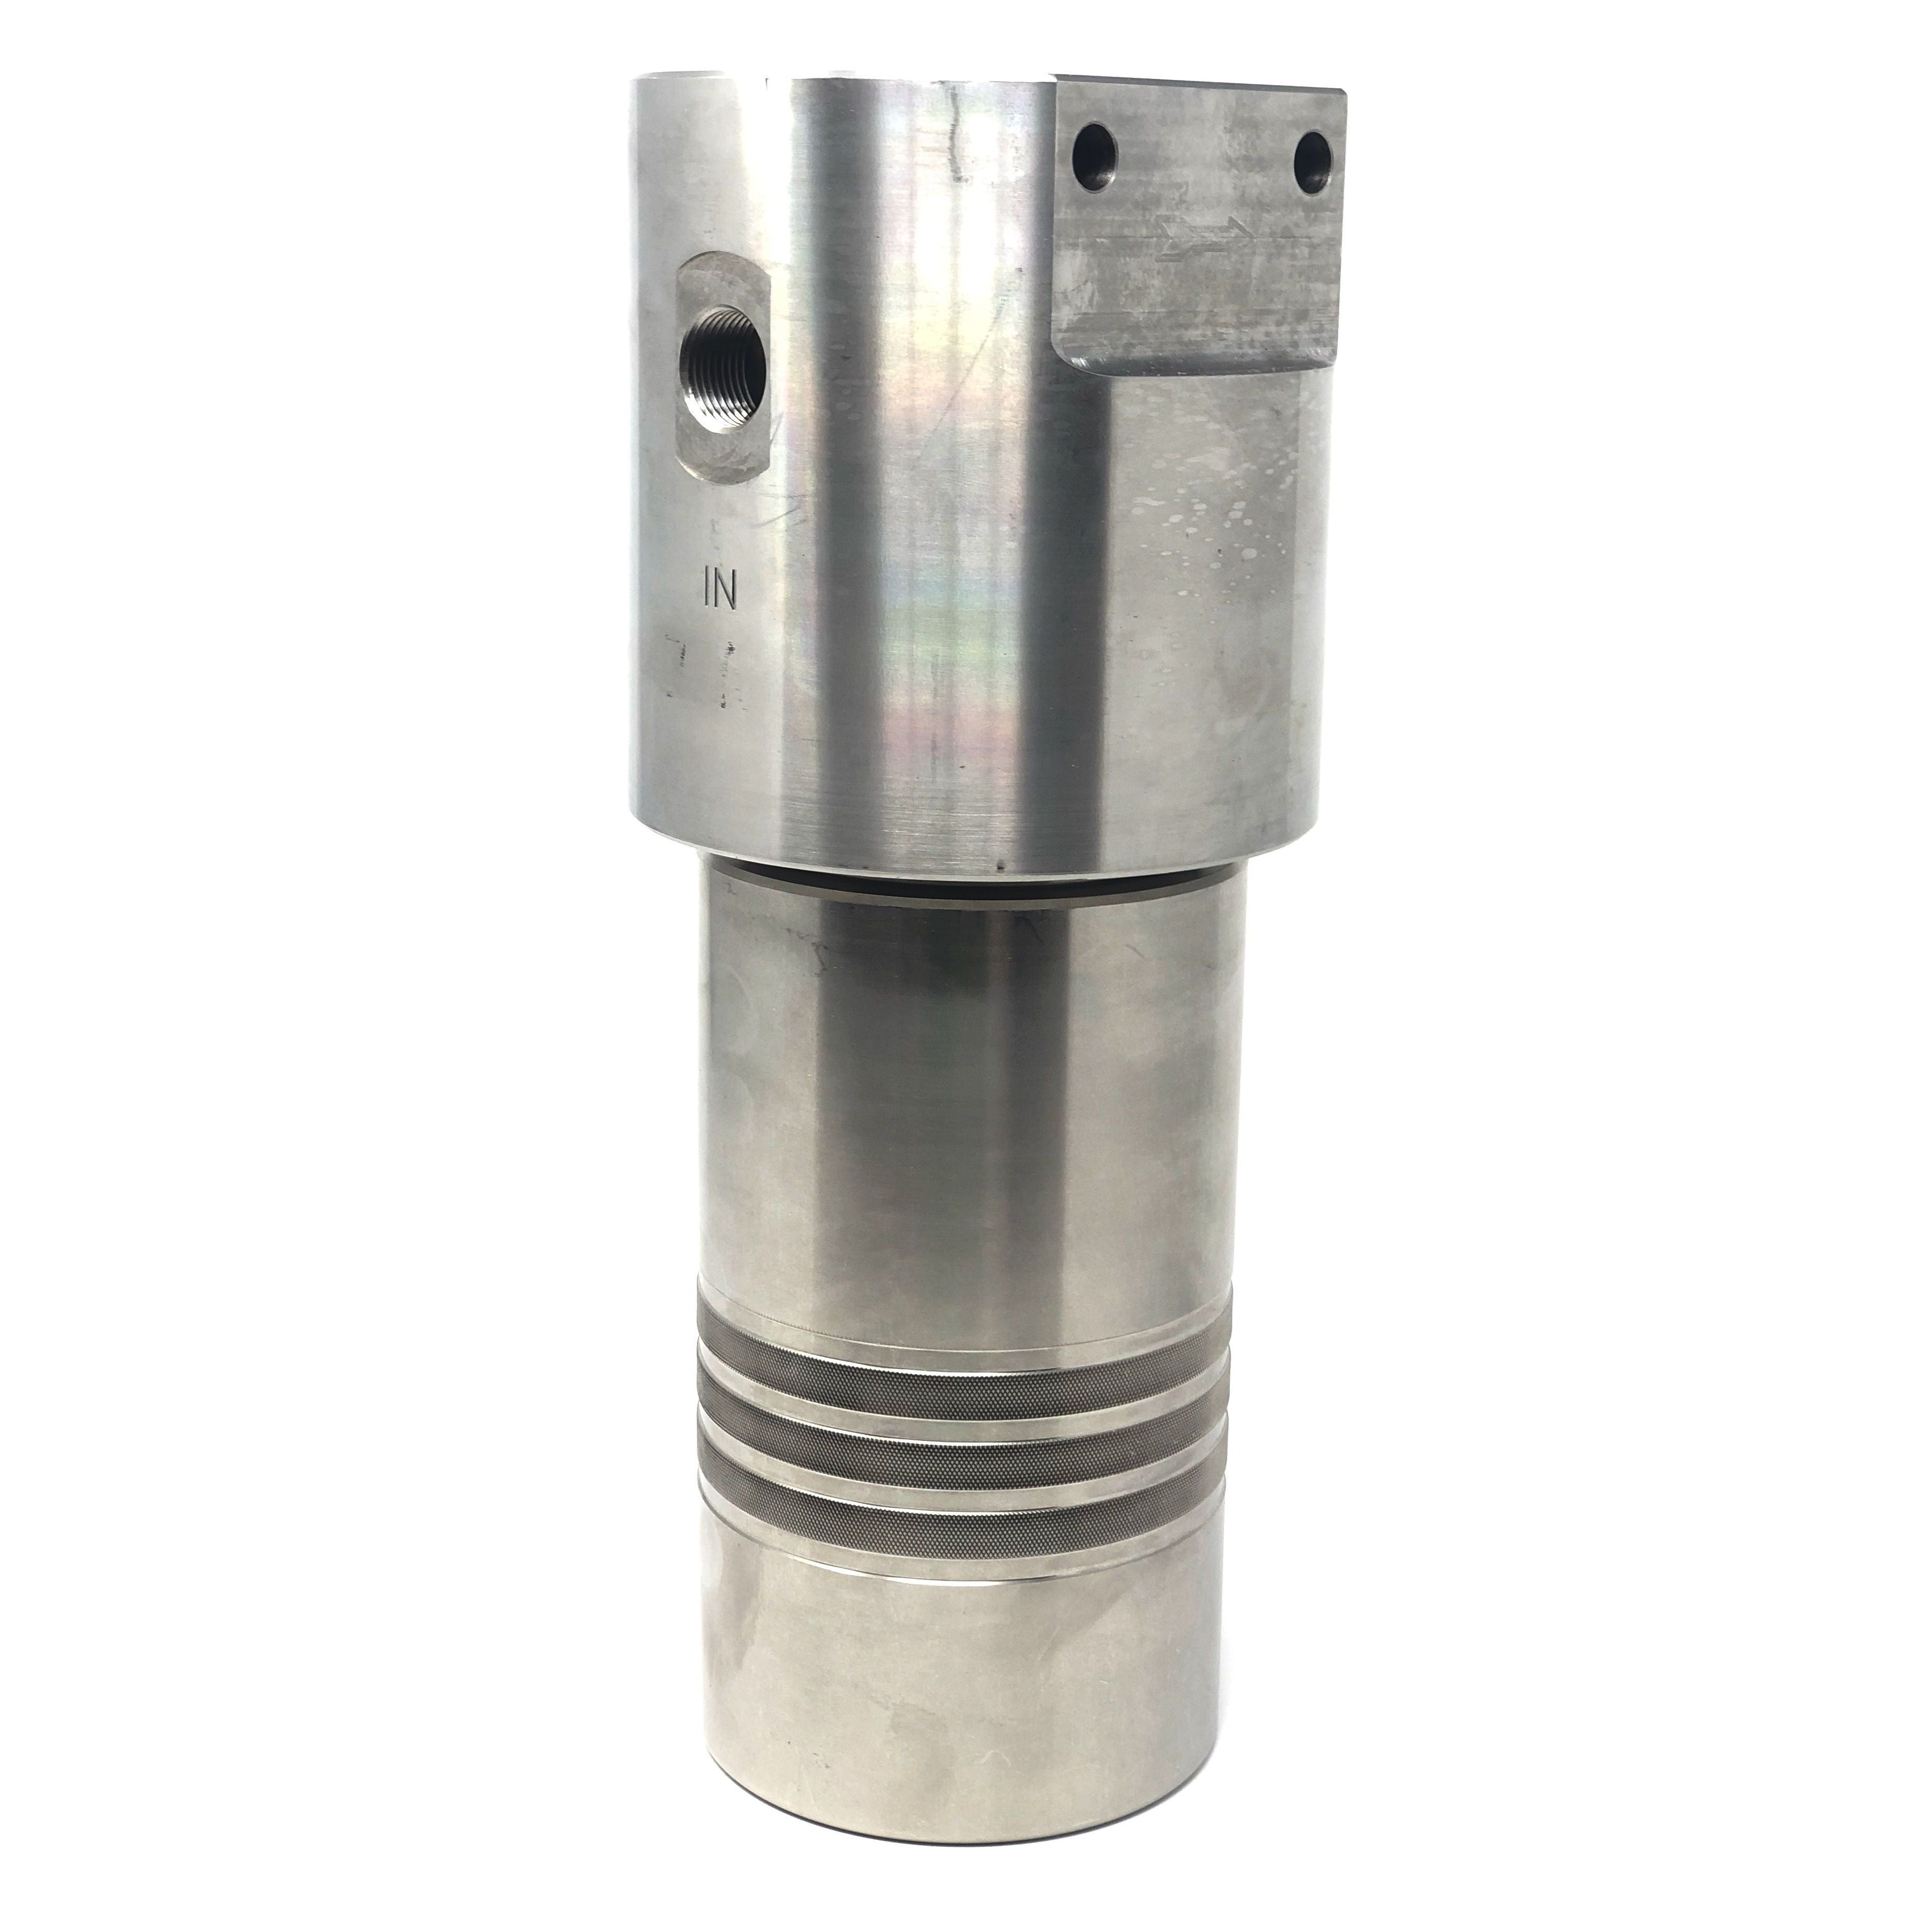 52S-2412S-25SEN : Chase Ultra High Pressure Inline Filter, 10000psi, #12 SAE (3/4"), 25 Micron, With Visual Indicator, No Bypass